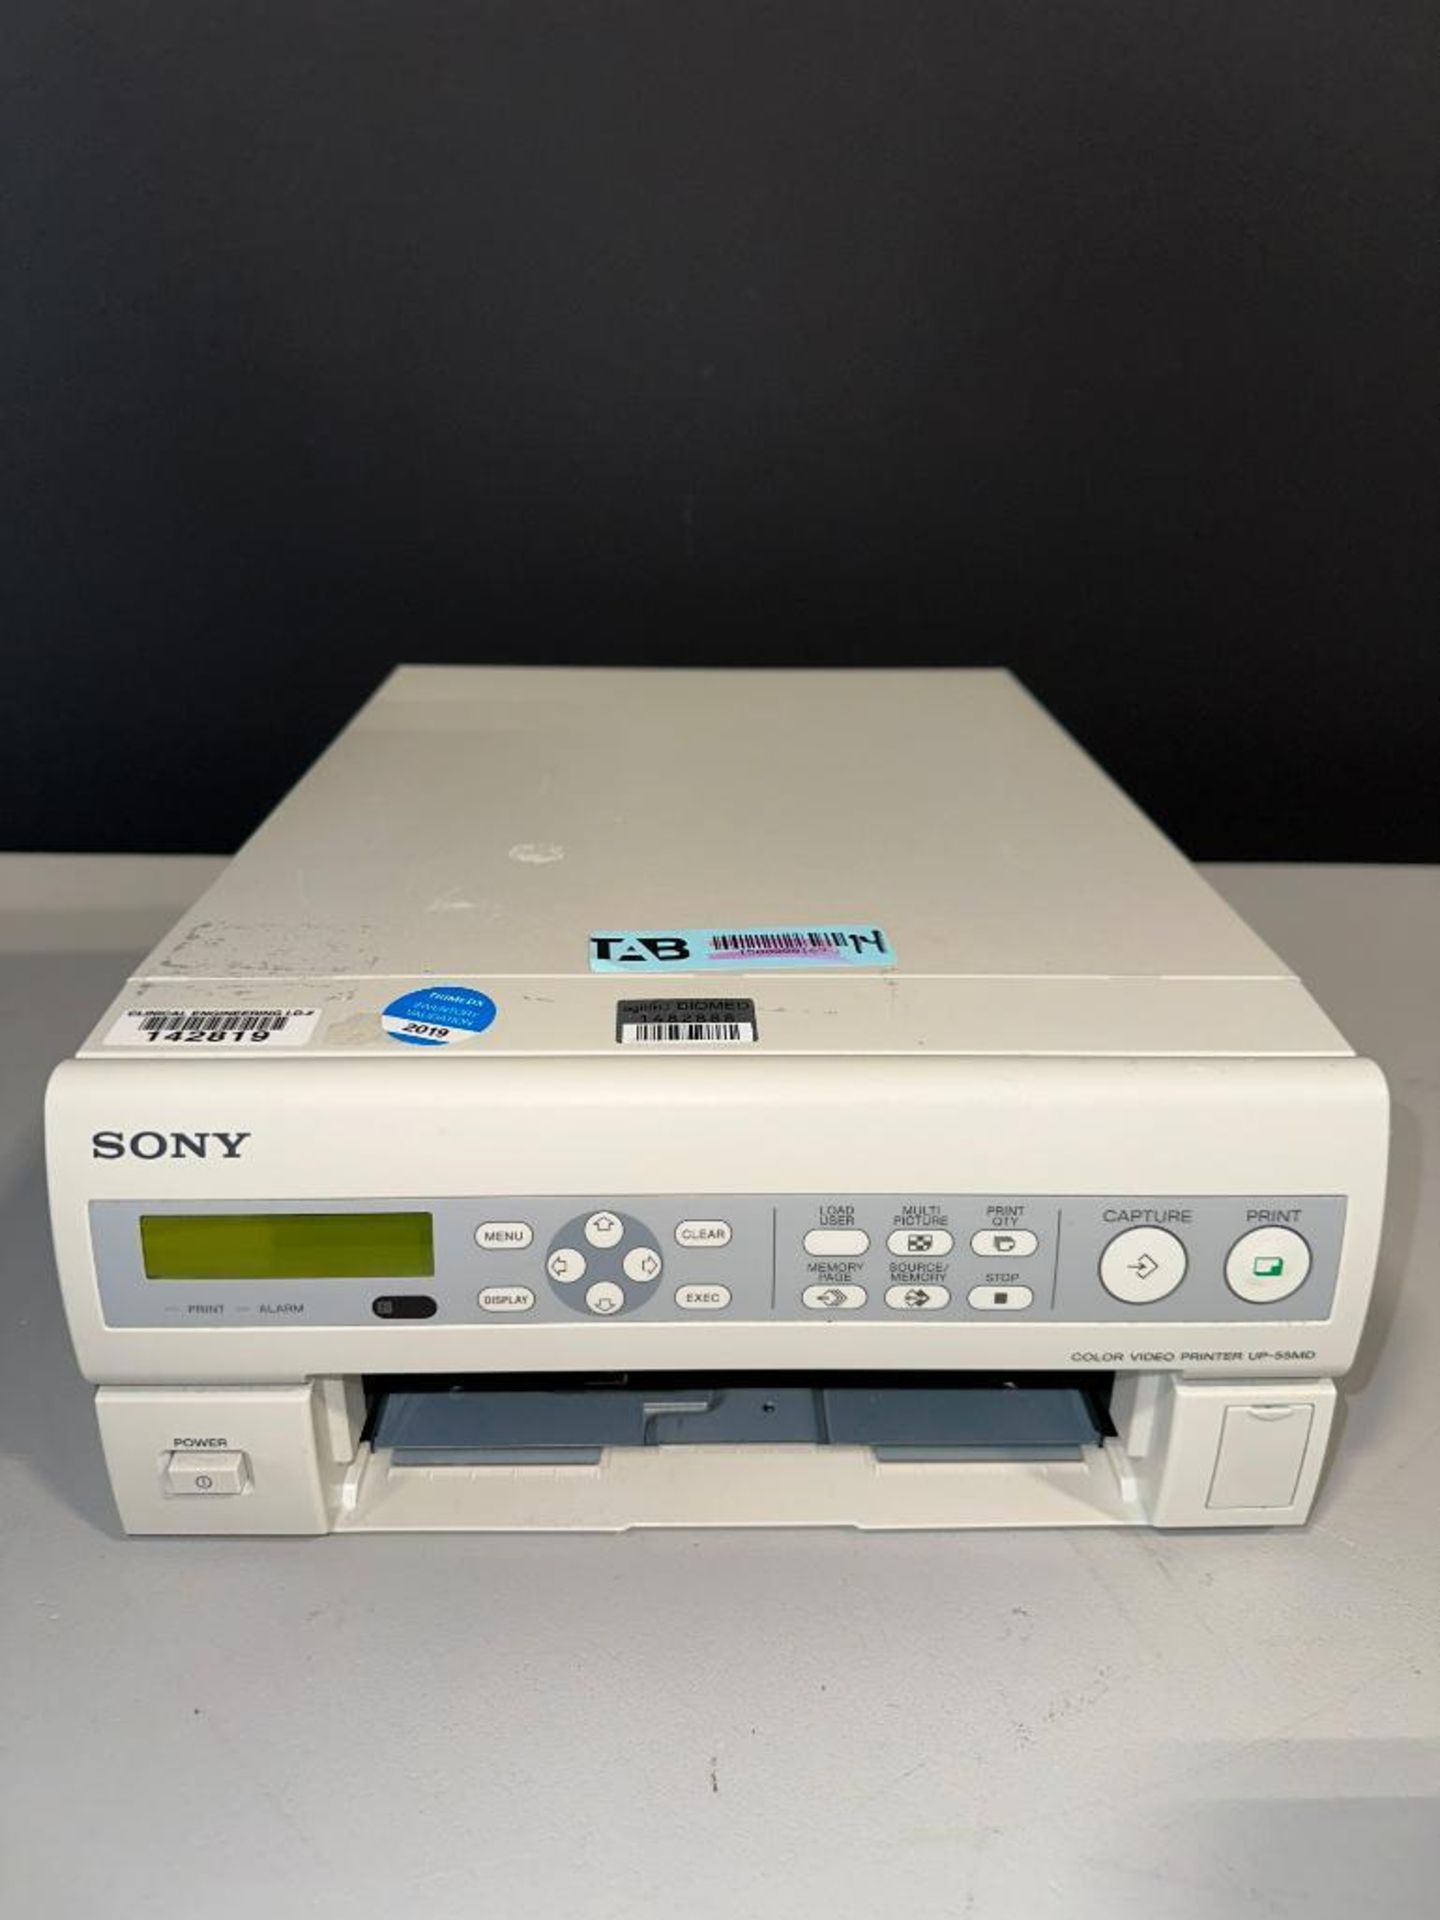 SONY UP-55MD COLOR VIDEO PRINTER